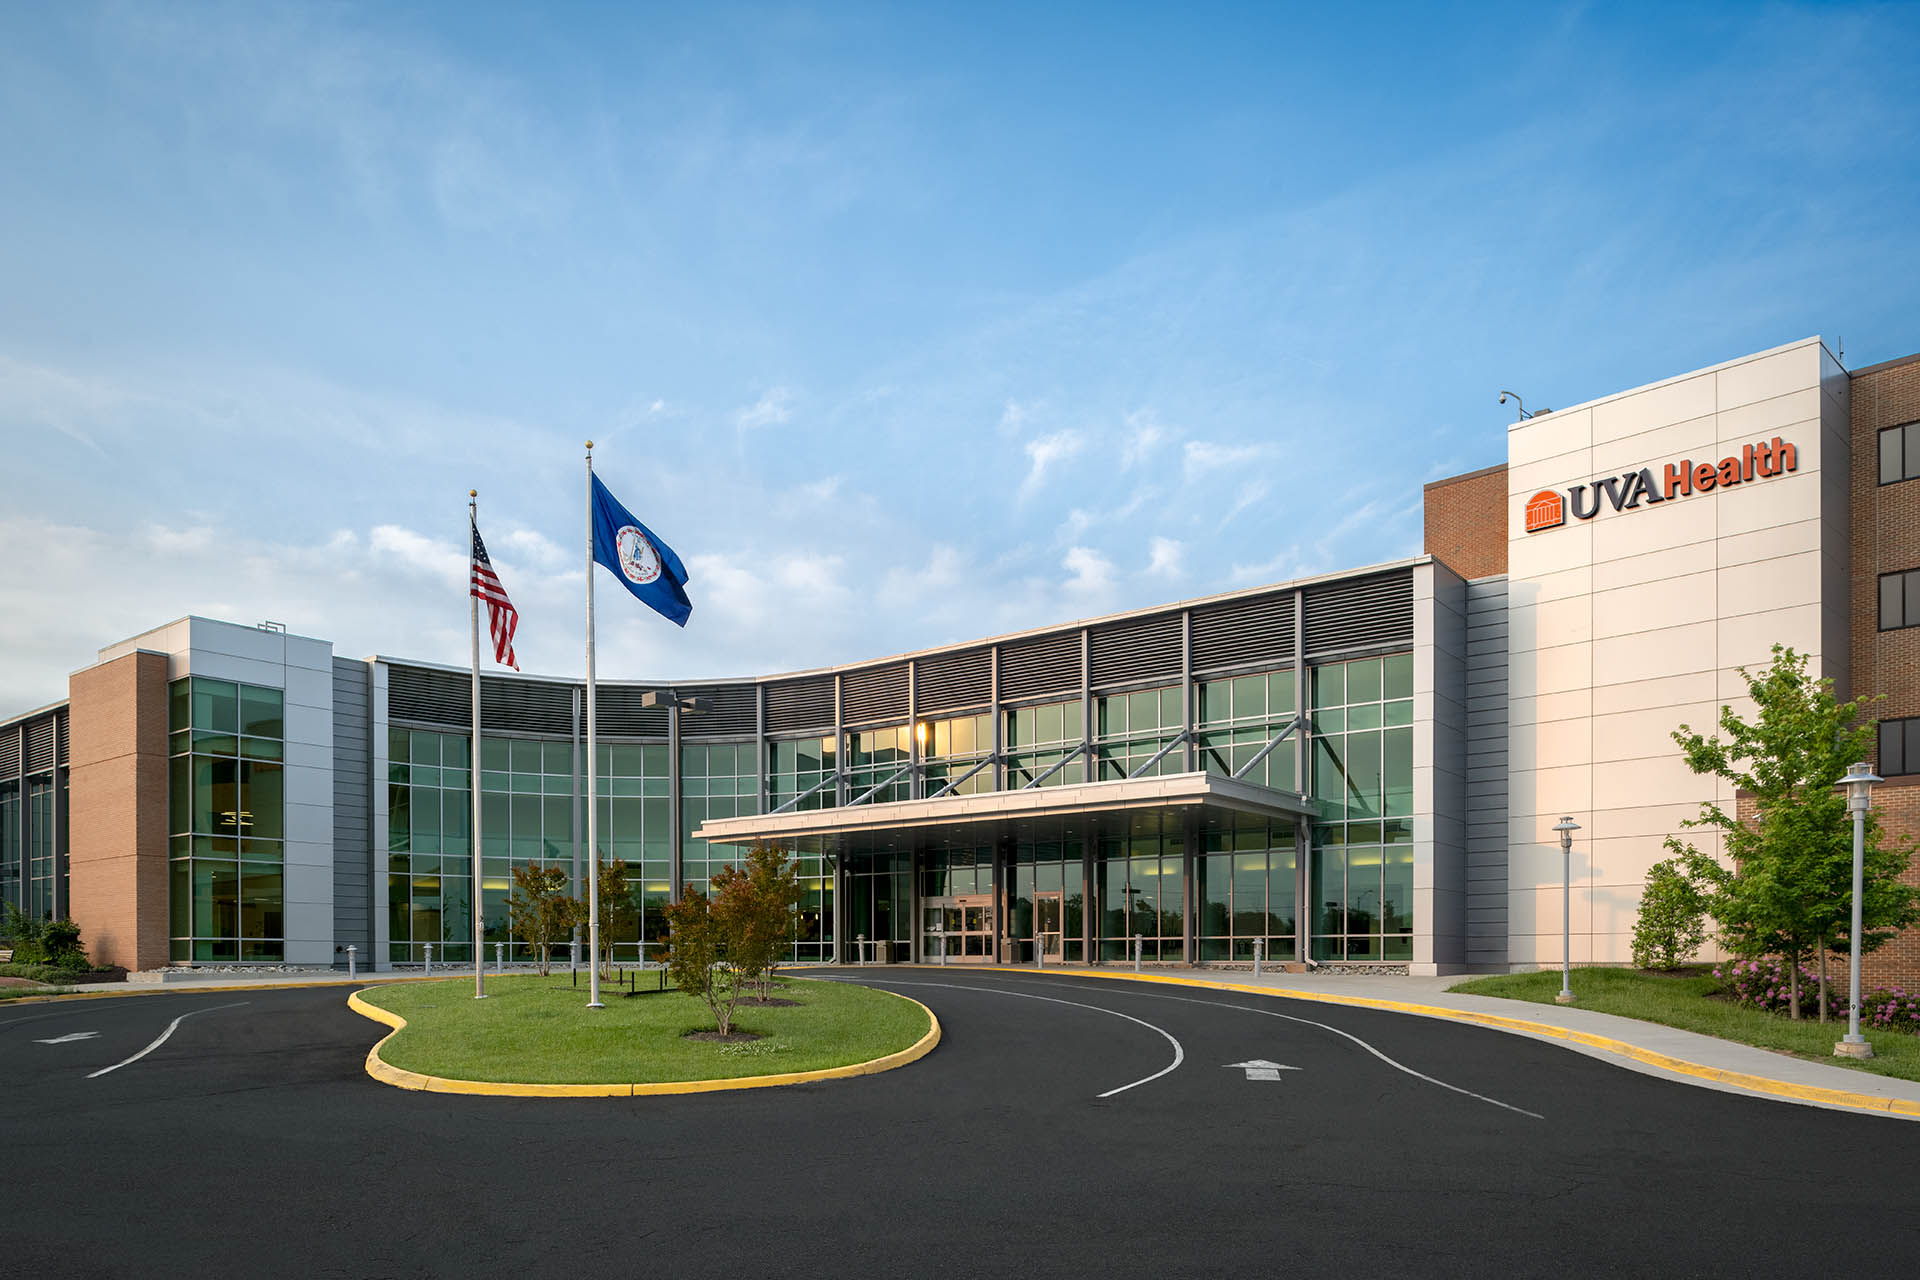 UVA Health Prince William Medical Center is Nationally Recognized and Awarded The American Heart Association Get With The Guidelines - Stroke Gold Plus Award with Target: Stroke Honor Roll Elite